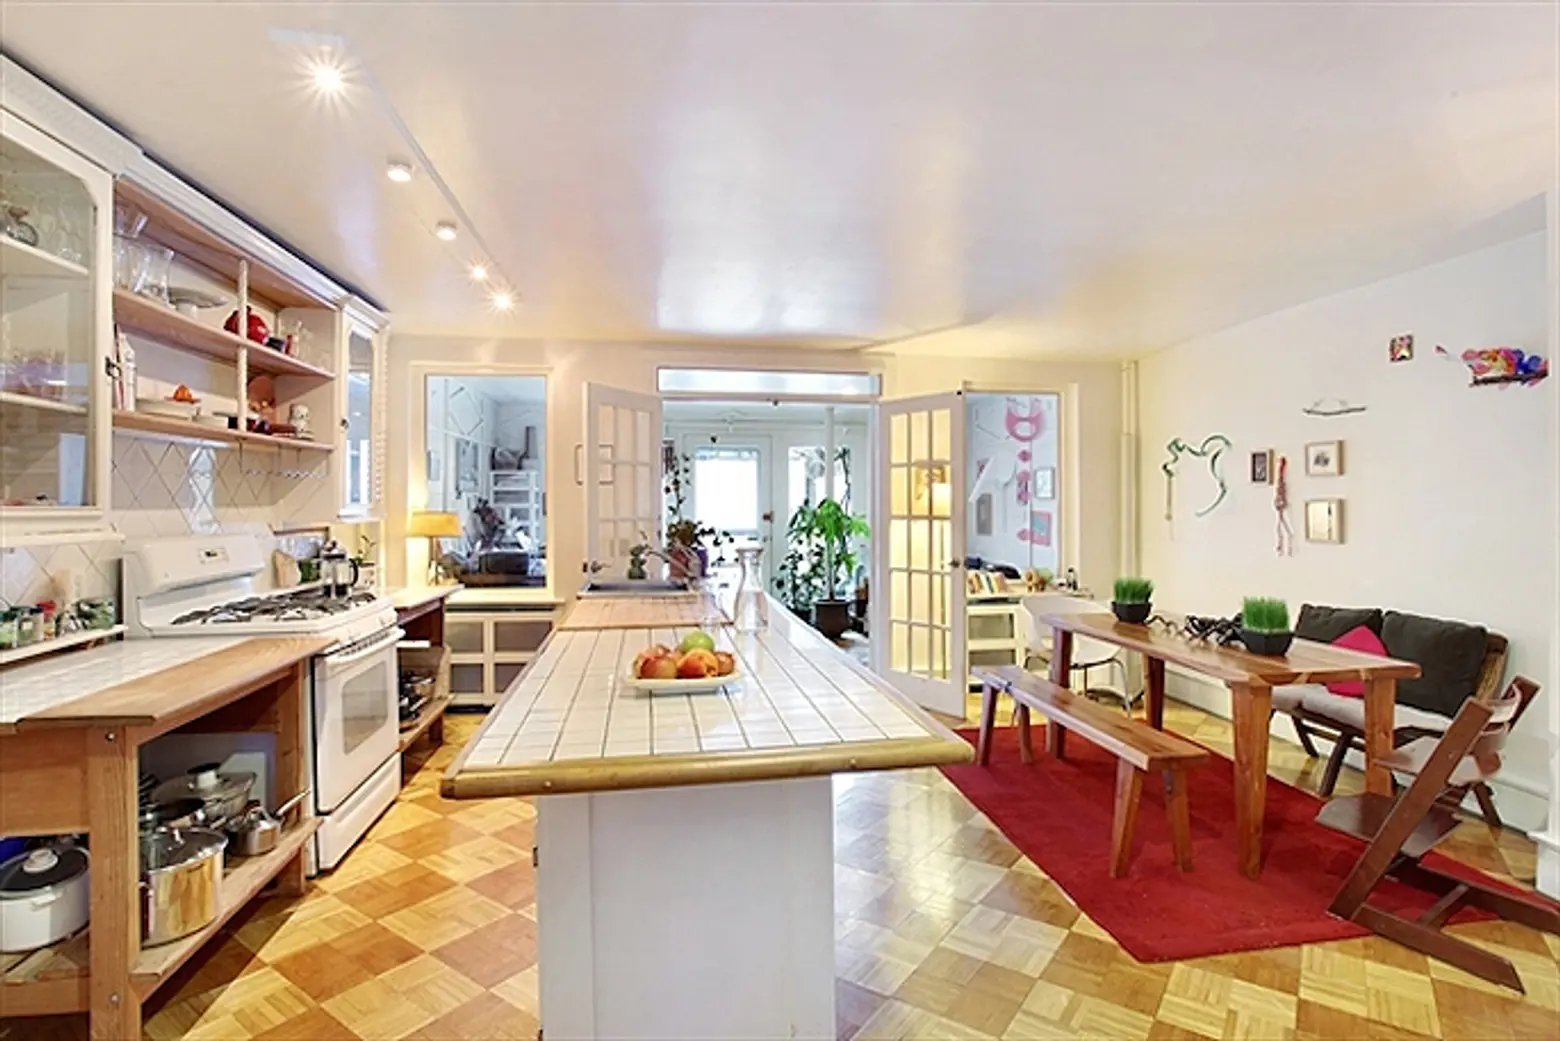 A Tree Grows In Brooklyn: $3.18M Historic Brooklyn Heights Town Home Has a Garden